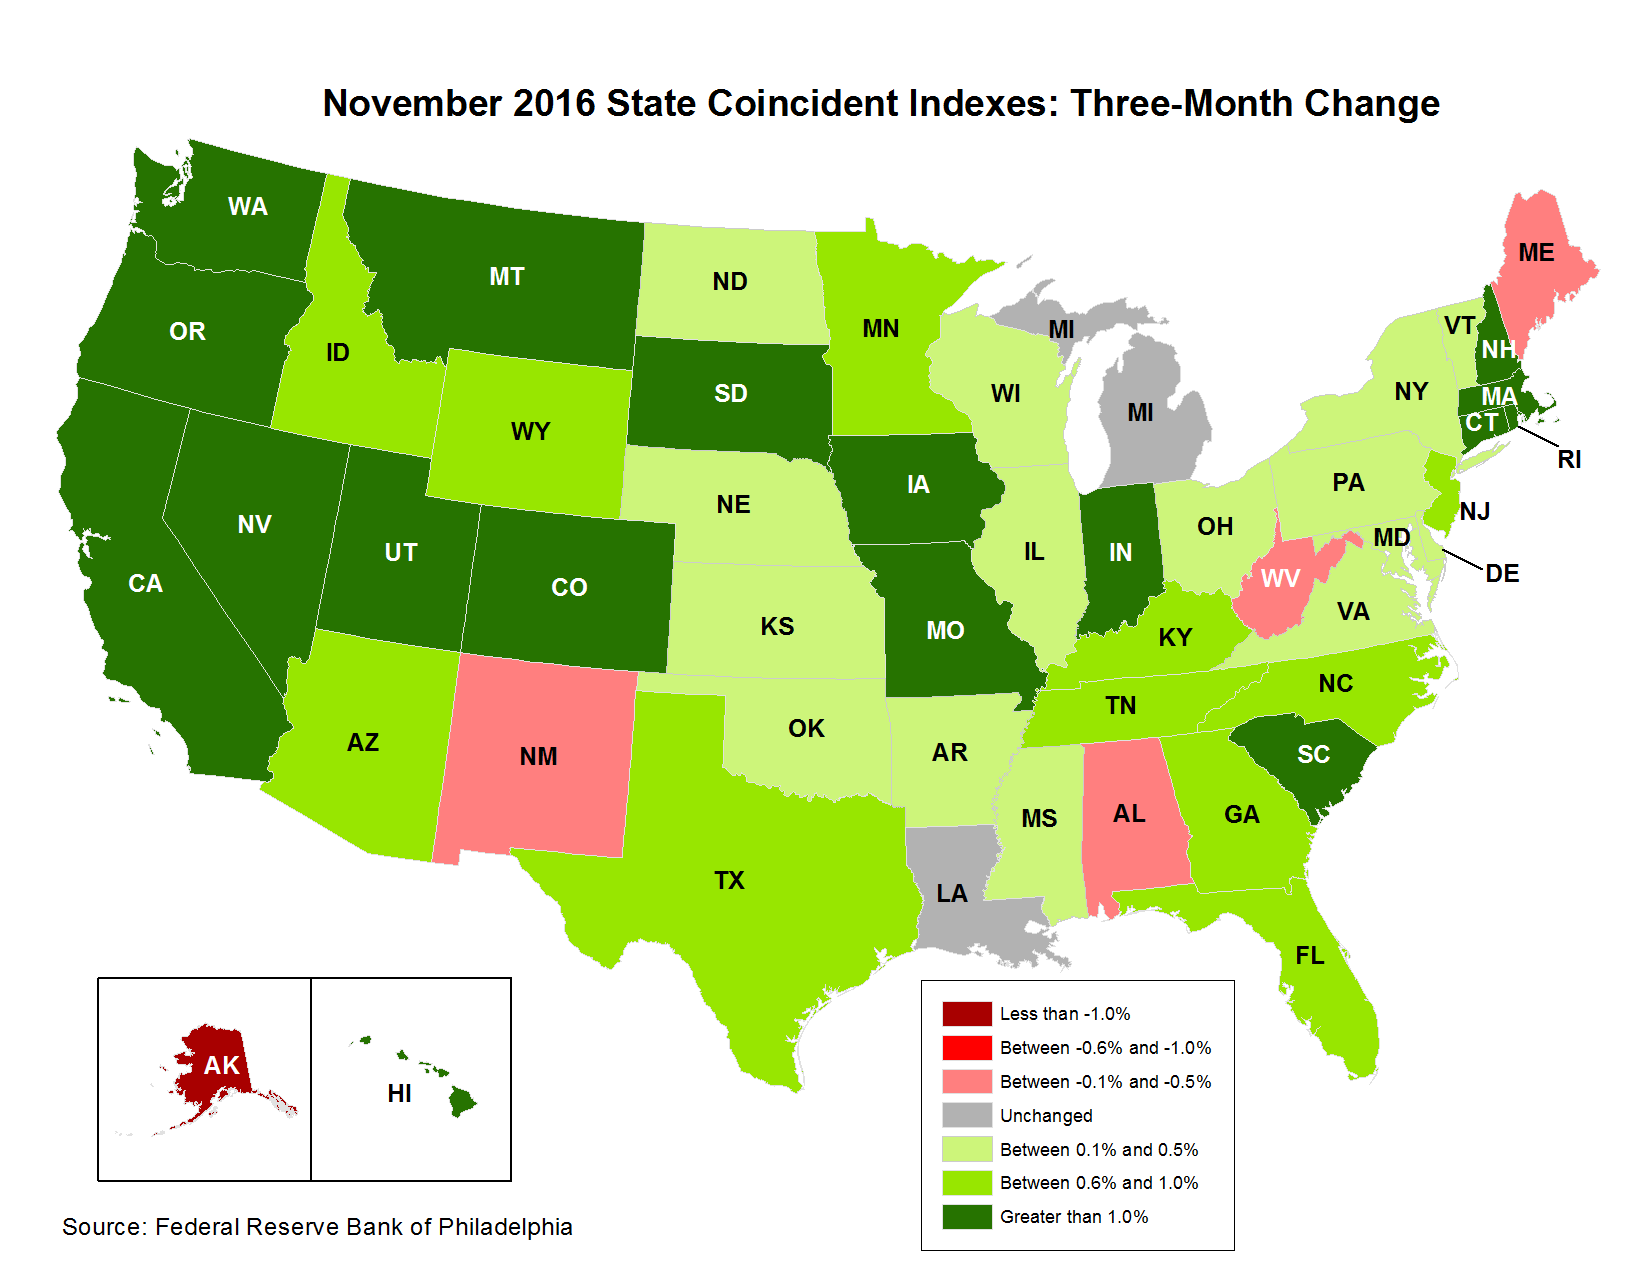 Map of the U.S. showing the State Coincident Indexes Three-Month Change in November 2016